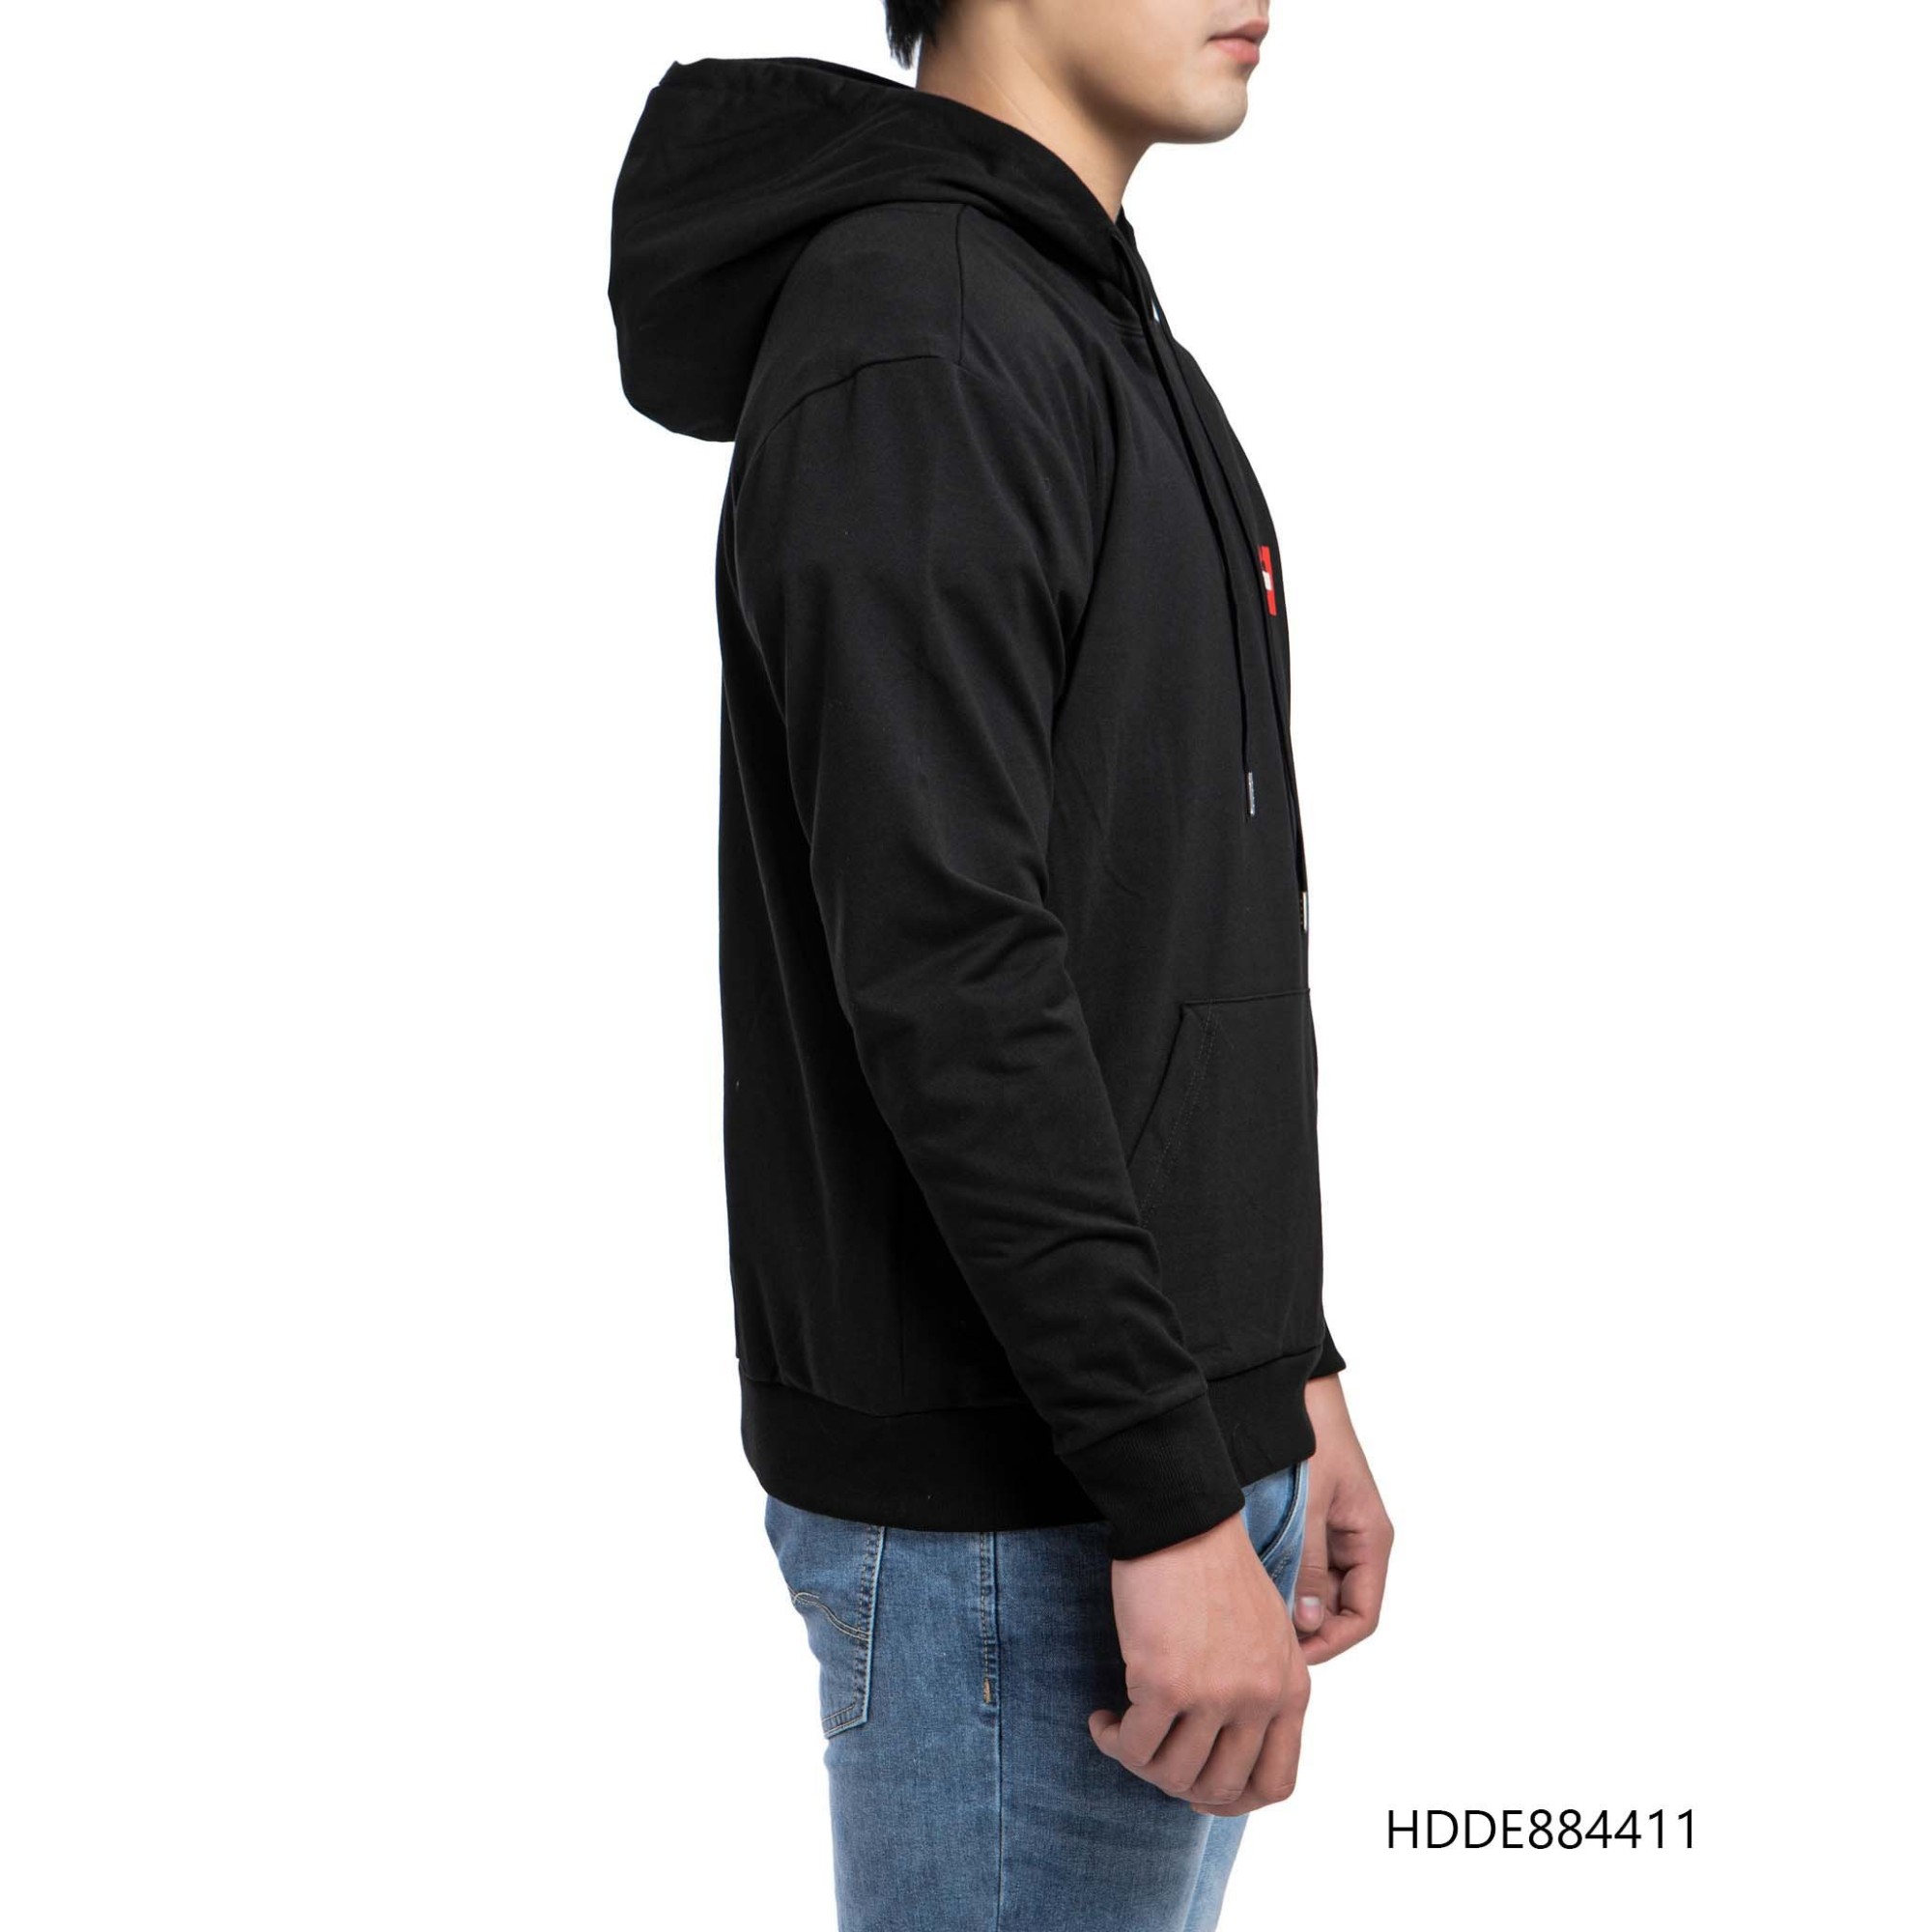 Áo hoodie red tag Old Sailor - O.S.L RED TAG HOODIE BLACK - HDDE884411 - đen - big size upto 4XL